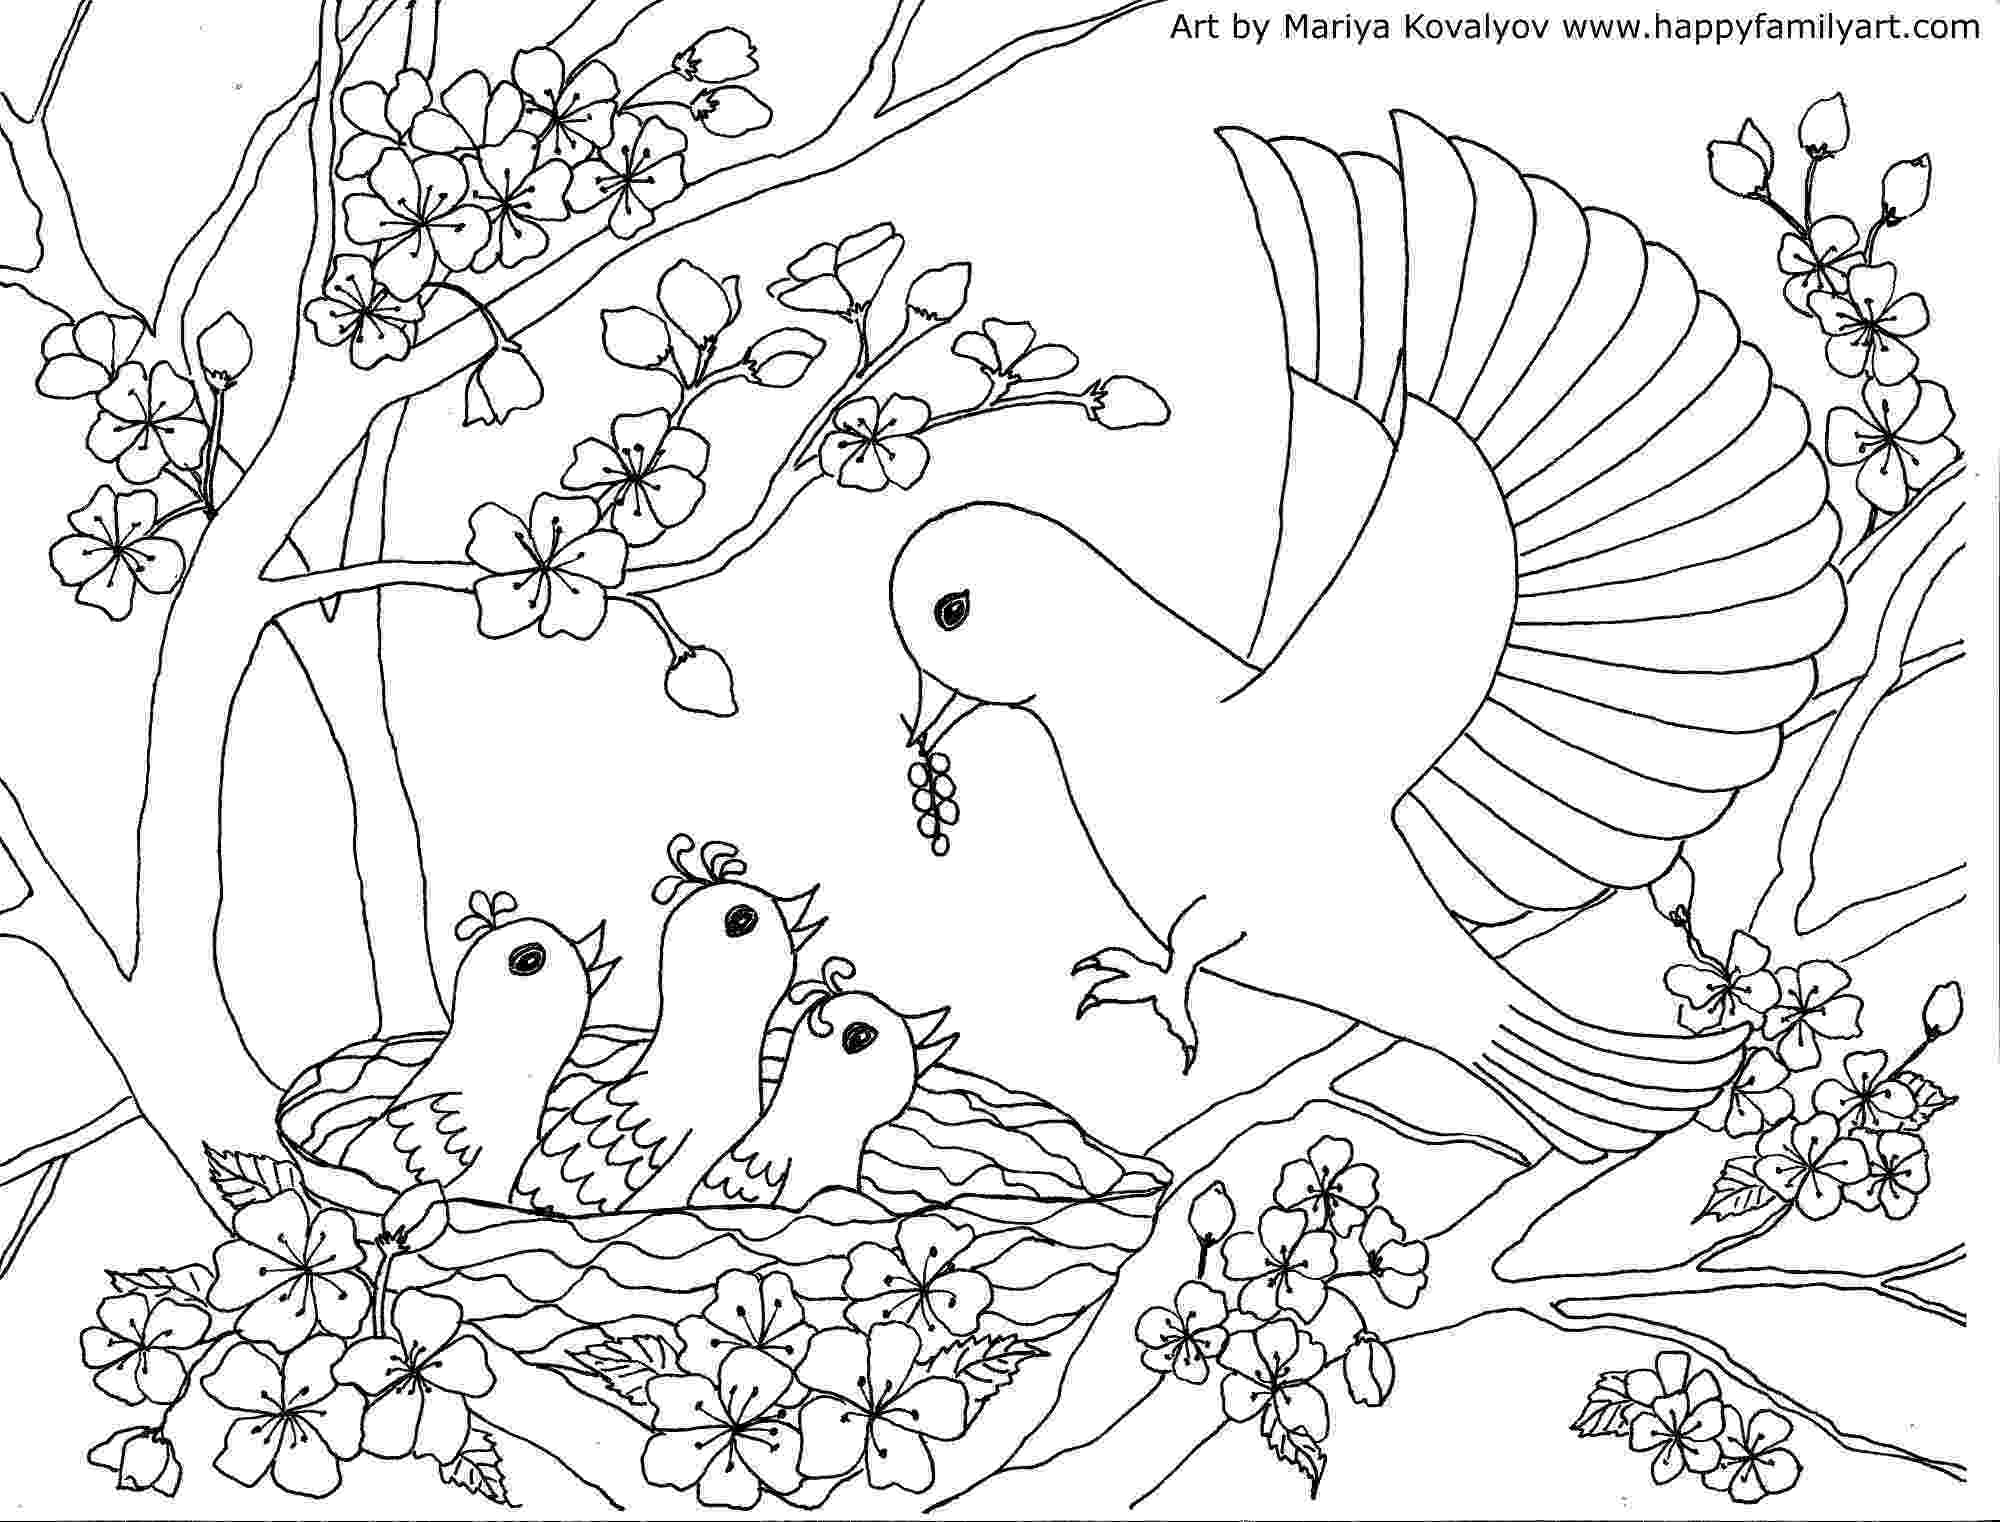 printable bird coloring pages bird coloring pages to download and print for free pages bird coloring printable 